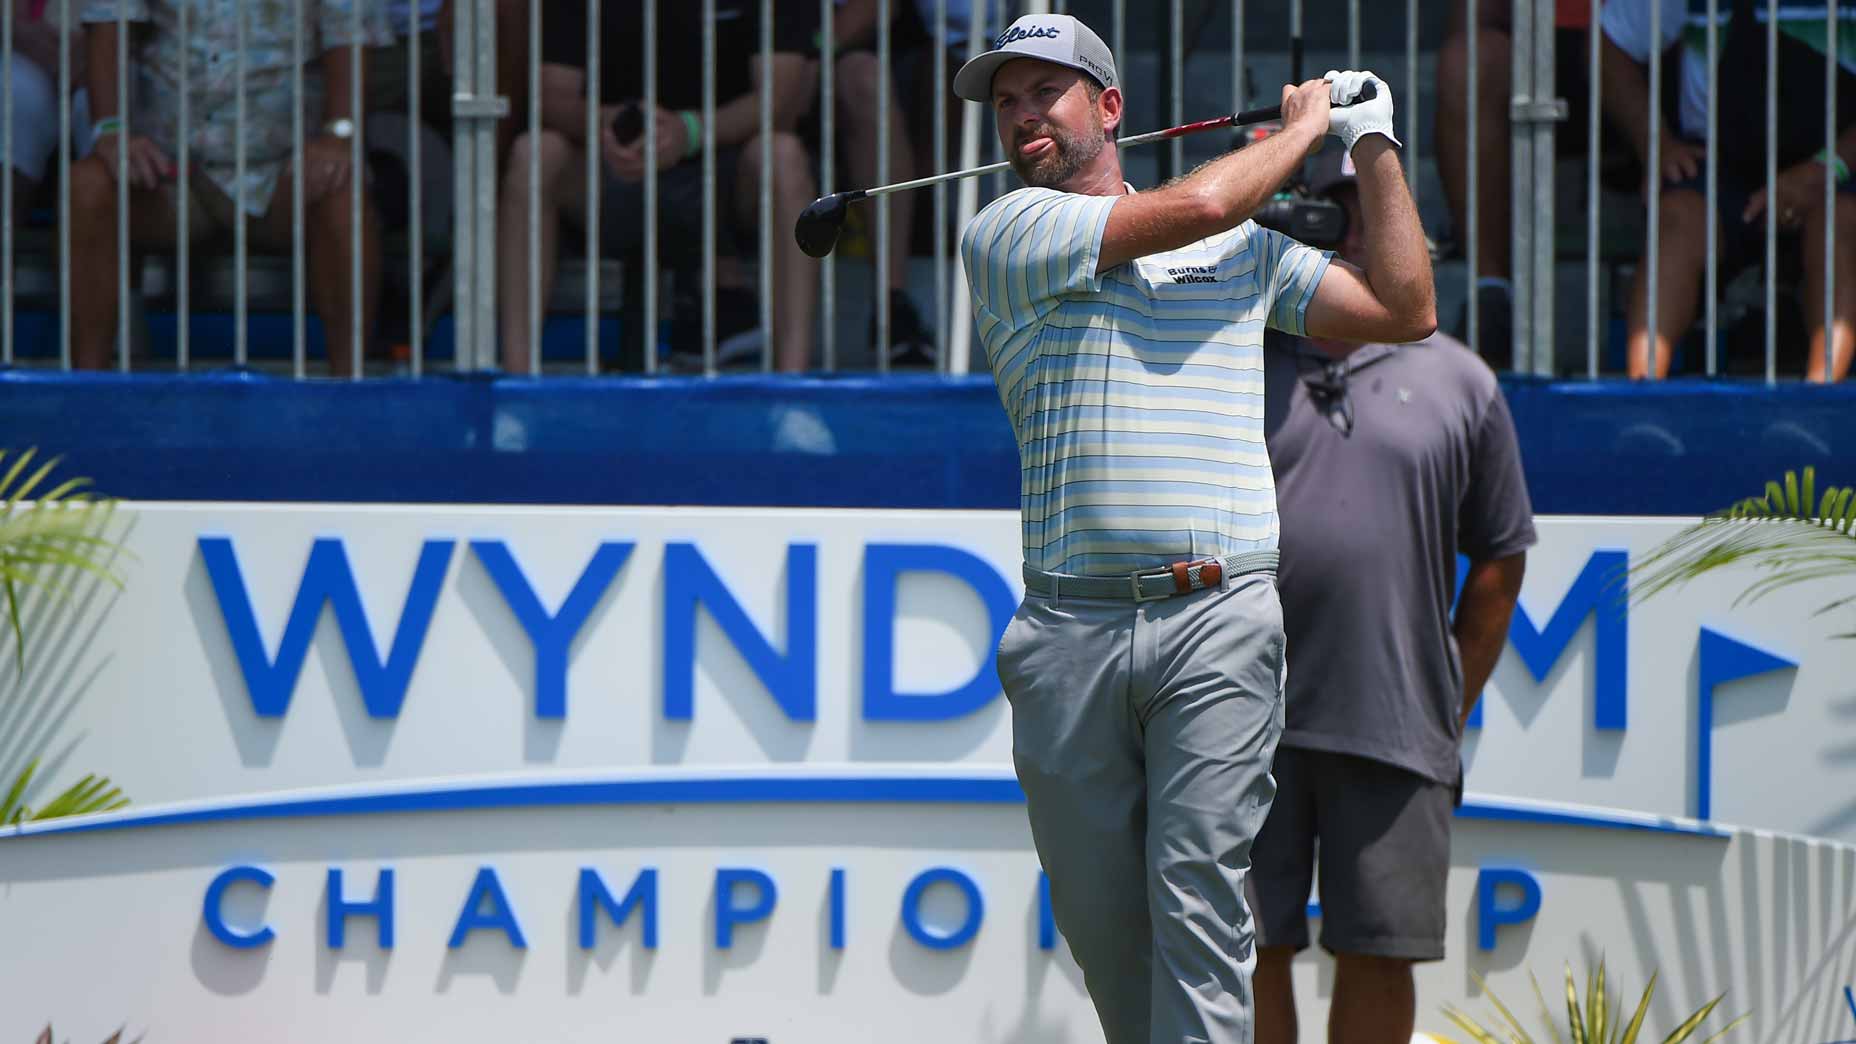 2022 Wyndham Championship How to watch, TV schedule, streaming, tee times